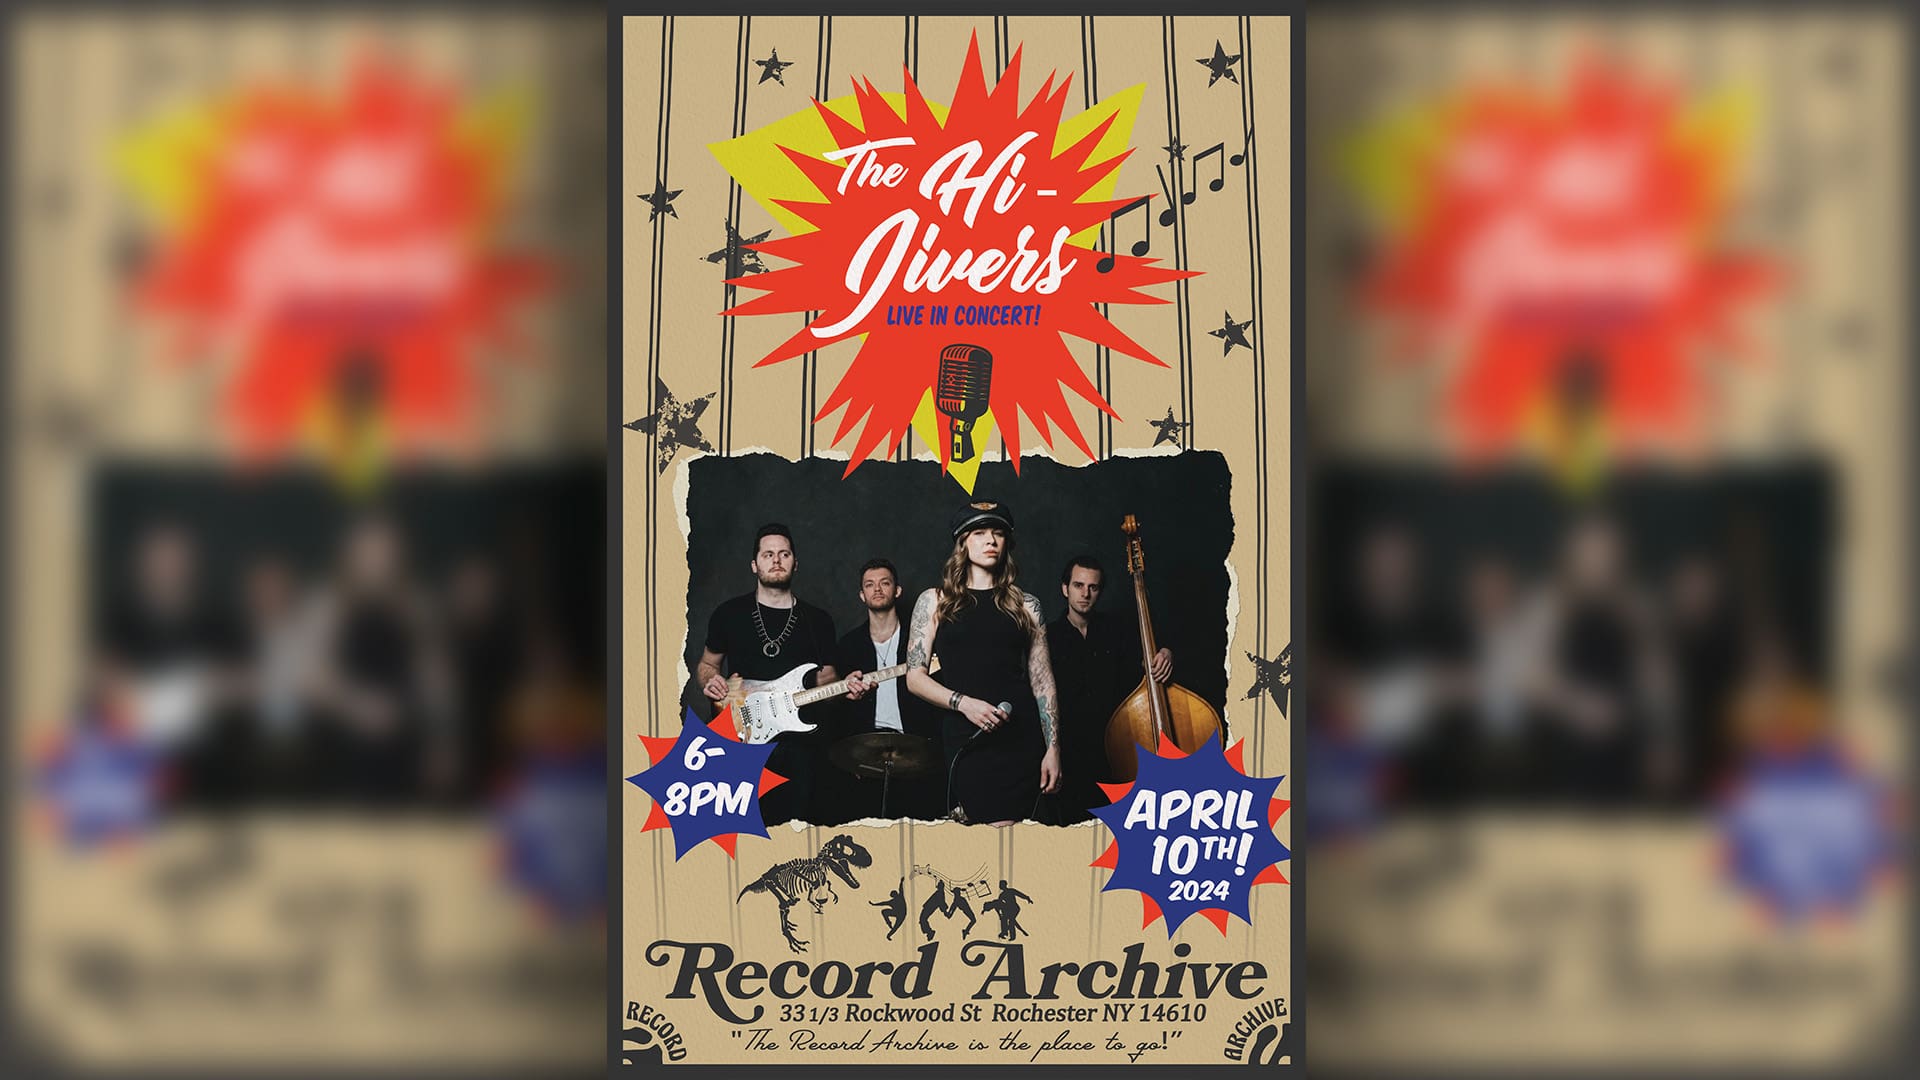 The Hi-Jivers. April 10th. 6-8pm. Record Archive 33 1/3 Rockwood St Rochester NY 14610